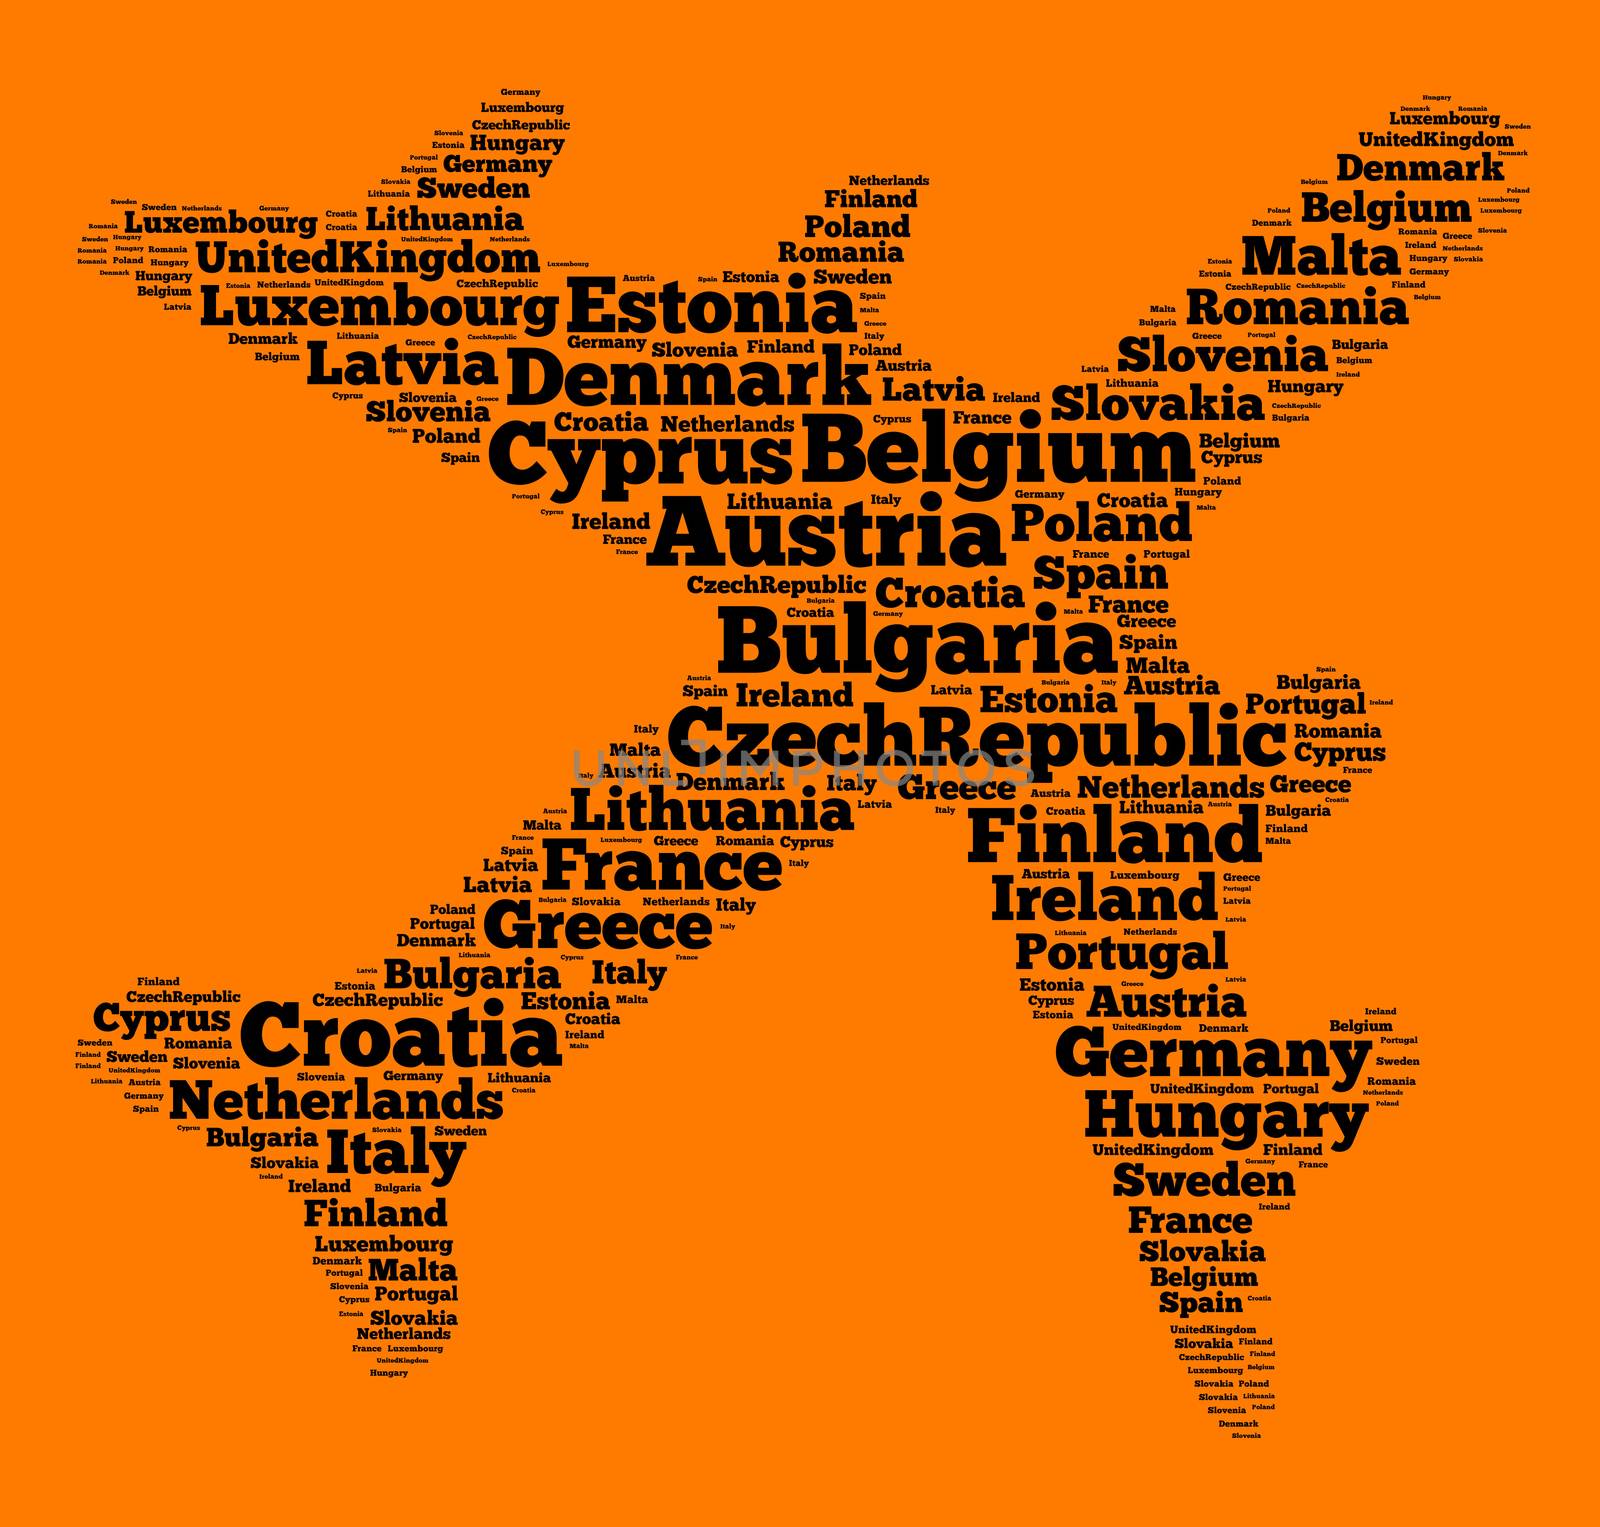 Nations in European union word cloud concept